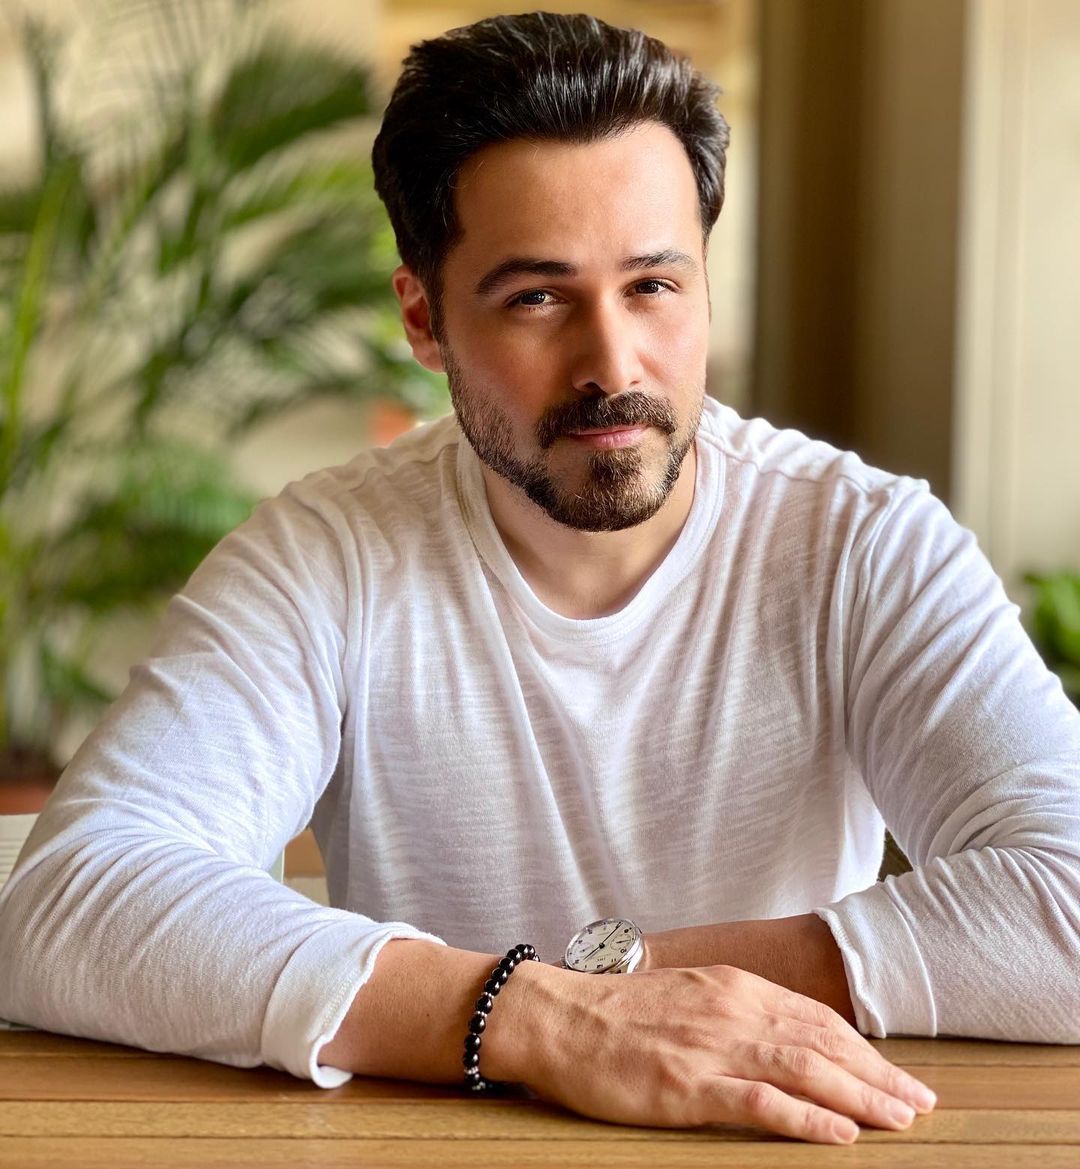 Tiger 3: Emraan Hashmi to play a ‘sophisticated villain’ in the Salman-Katrina starrer; will sport multiple looks